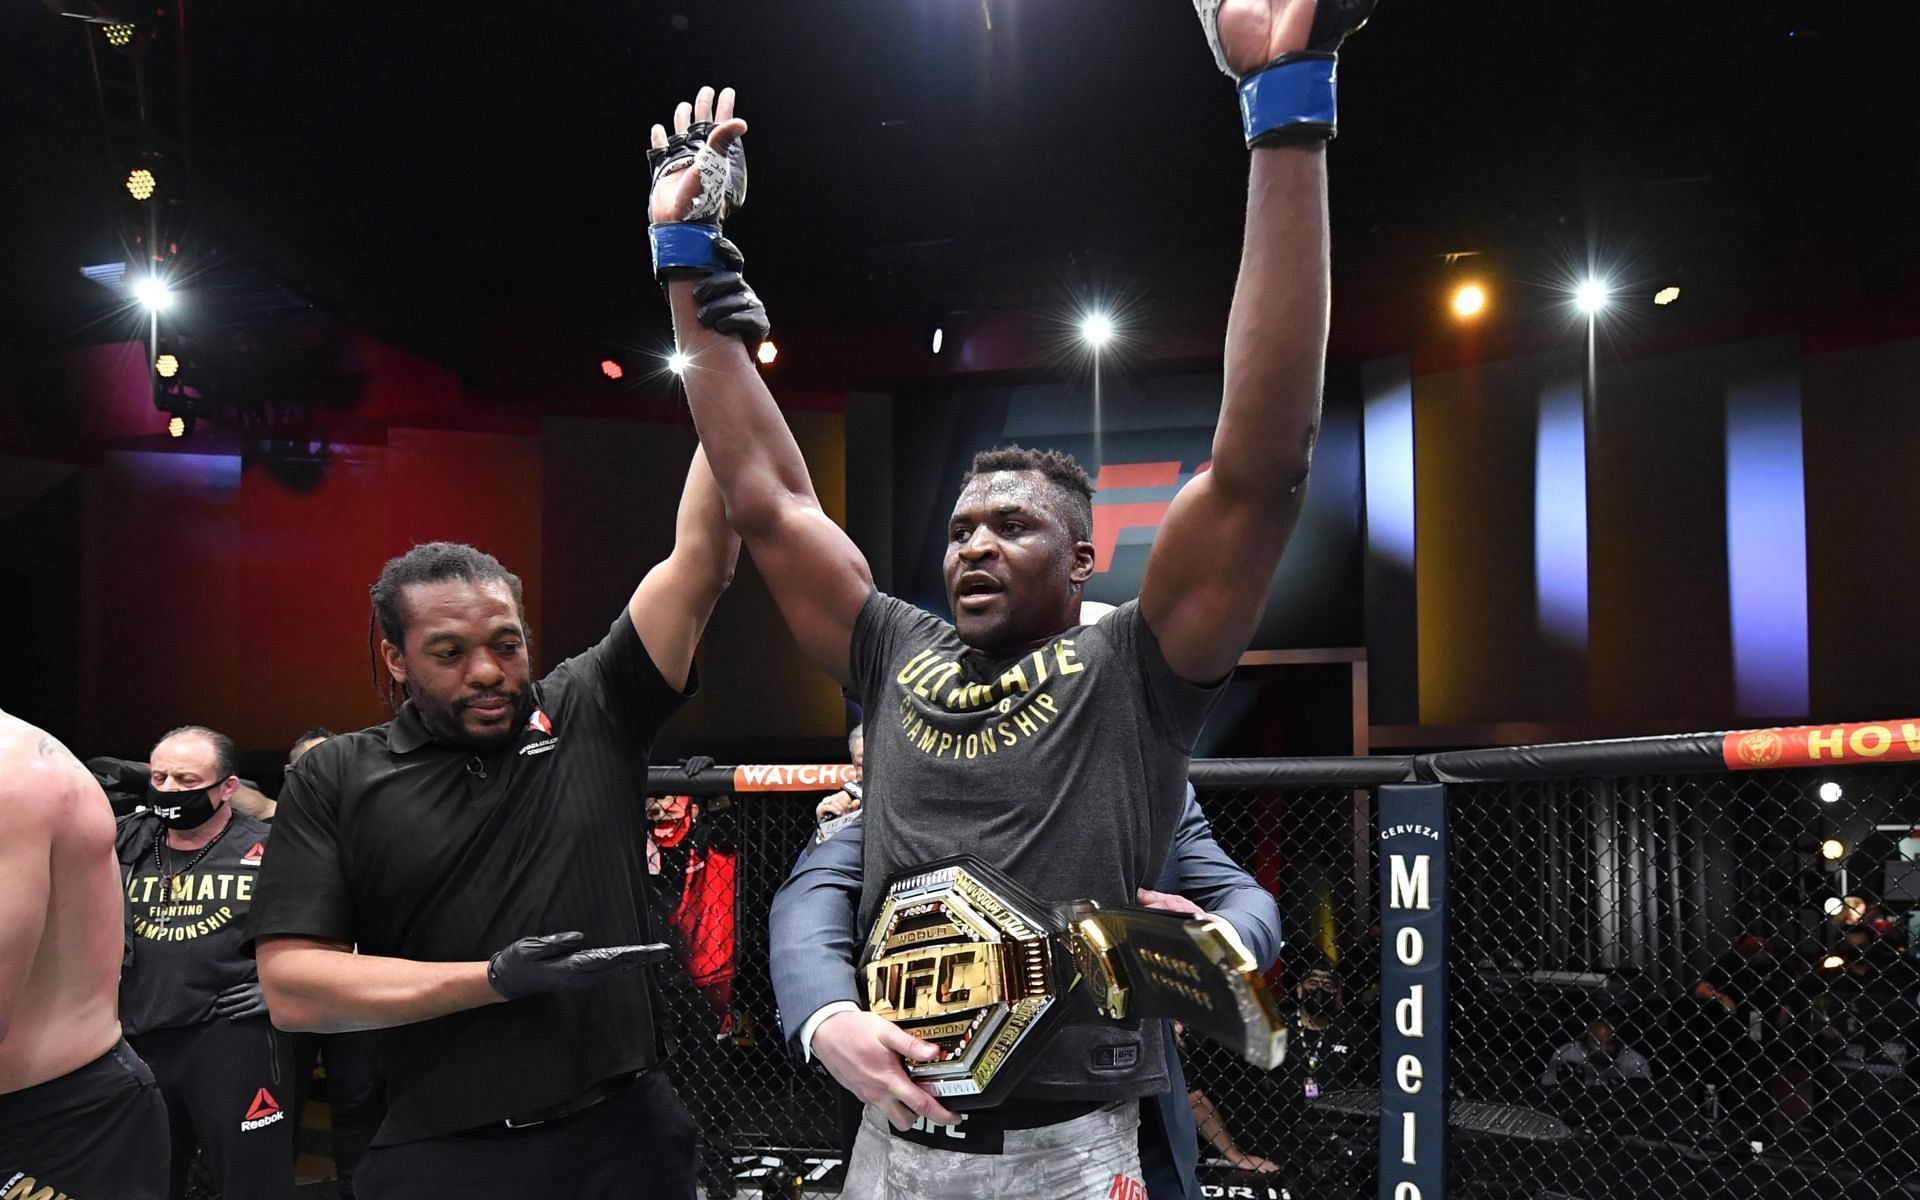 The UFC heavyweight title, currently held by Francis Ngannou, has changed hands plenty of times over the years